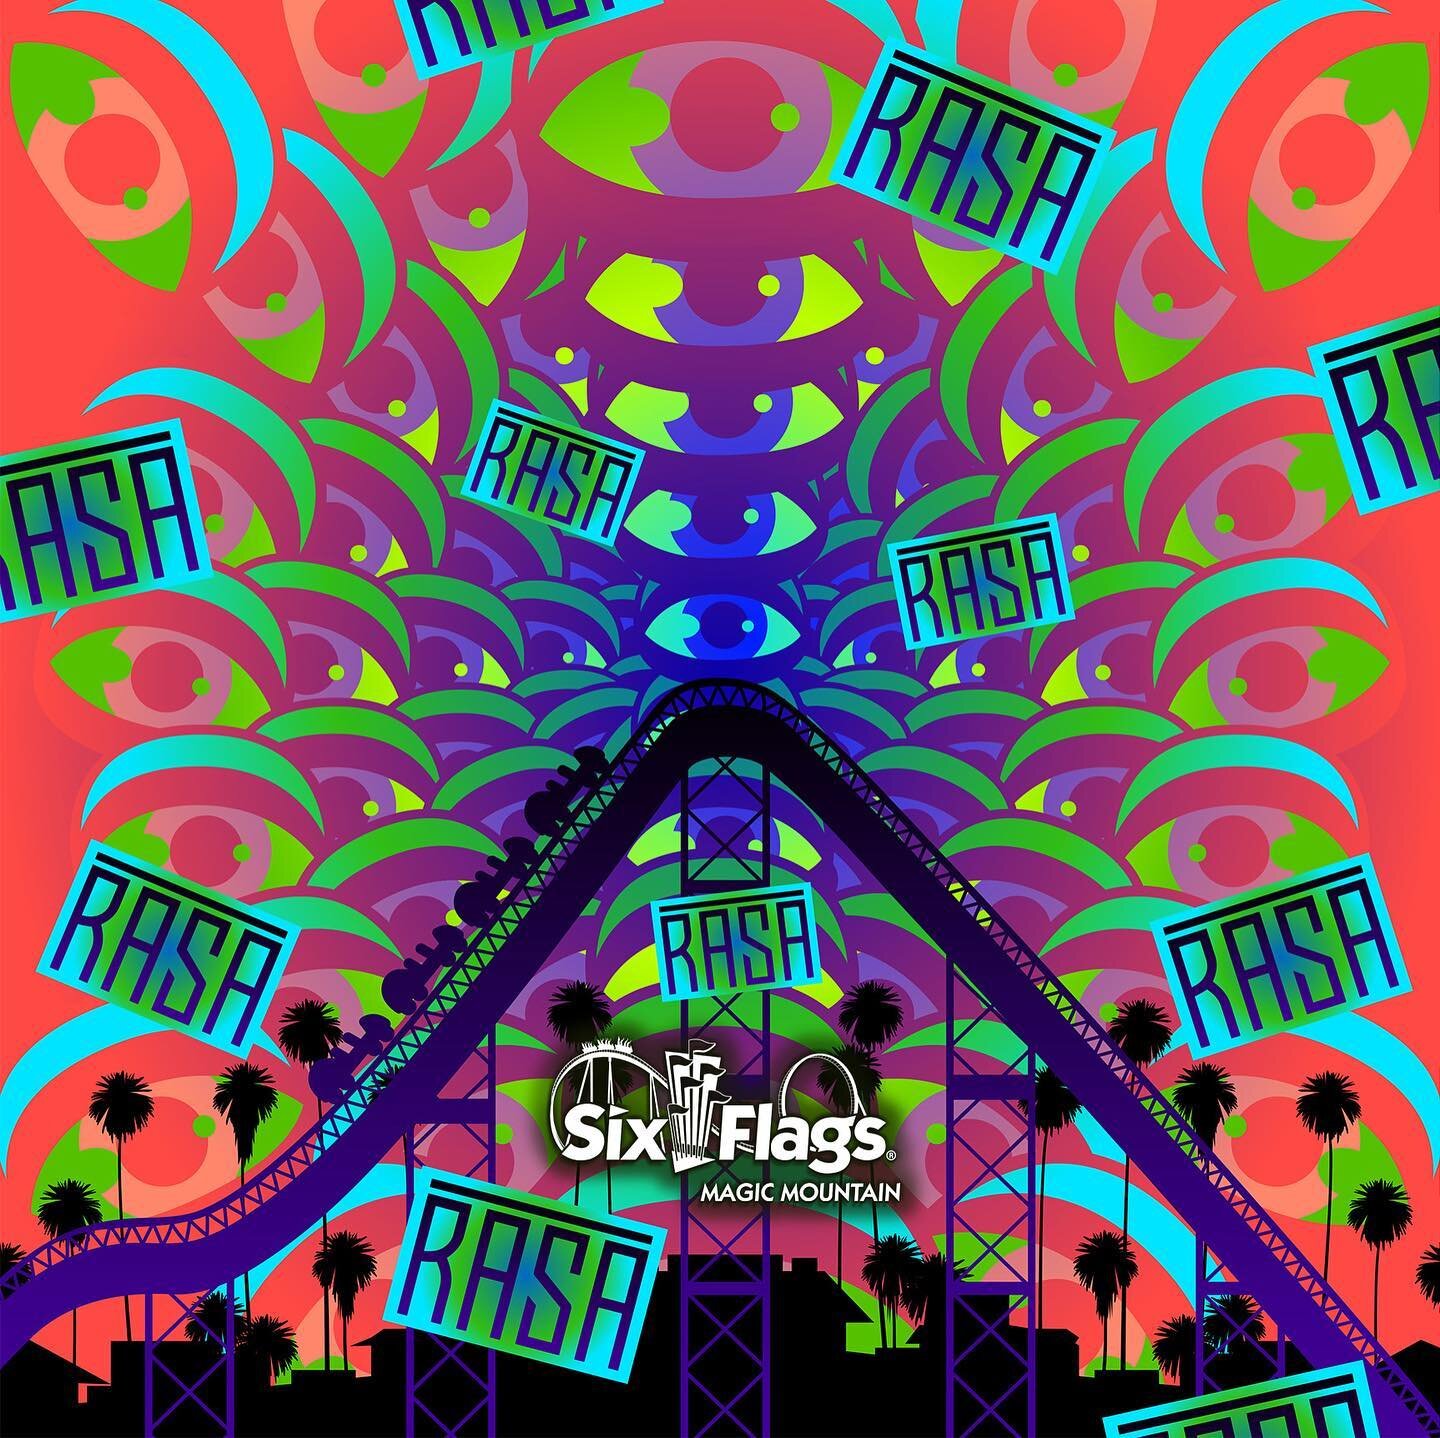 Come party with us this Saturday at Thrill City by @rasa.us at @sixflagsmagicmountain 🥳🎢 I designed some selfie walls and will be doing a little bit of live painting as well 🕺

@rasa.us
@sixflagsmagicmountain 
@samsonssound
@gretabradbury
@dmtrimu